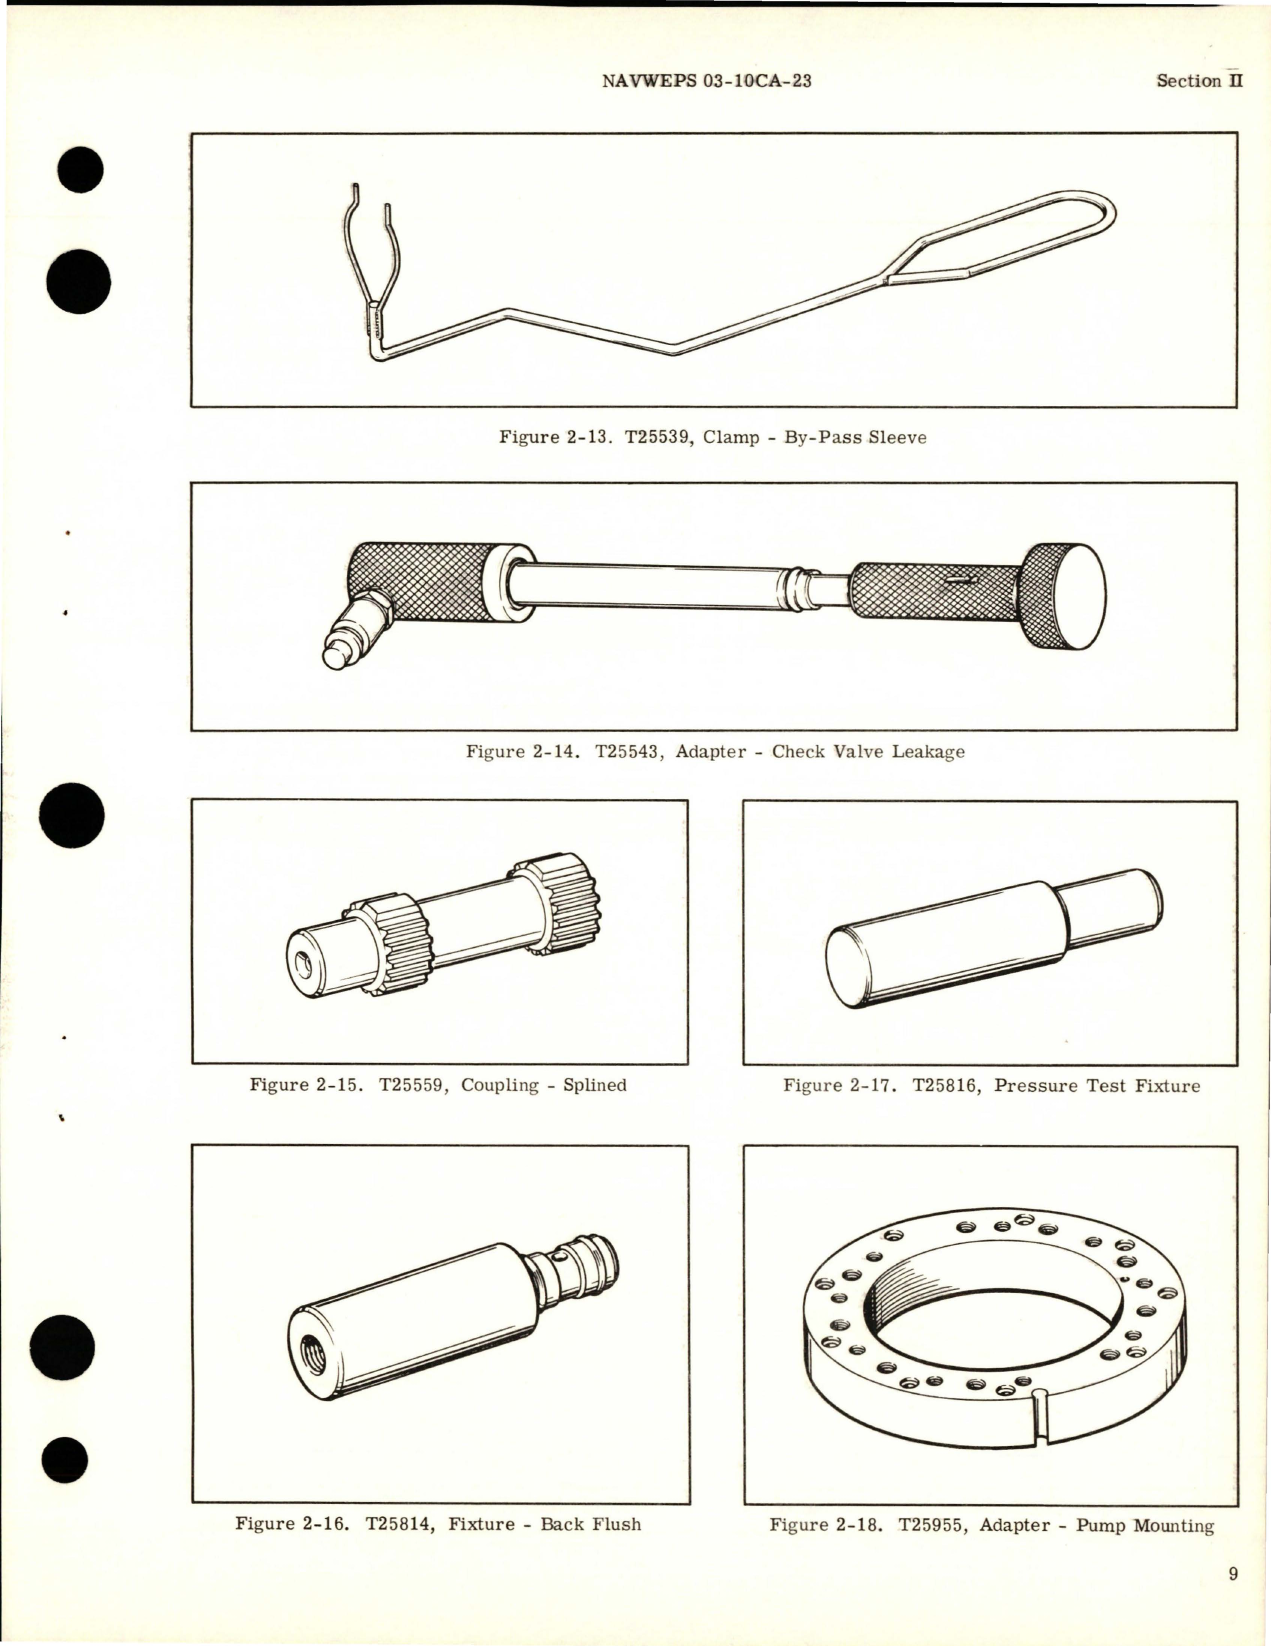 Sample page 9 from AirCorps Library document: Overhaul Instructions for Direct Fuel Injection Pumps